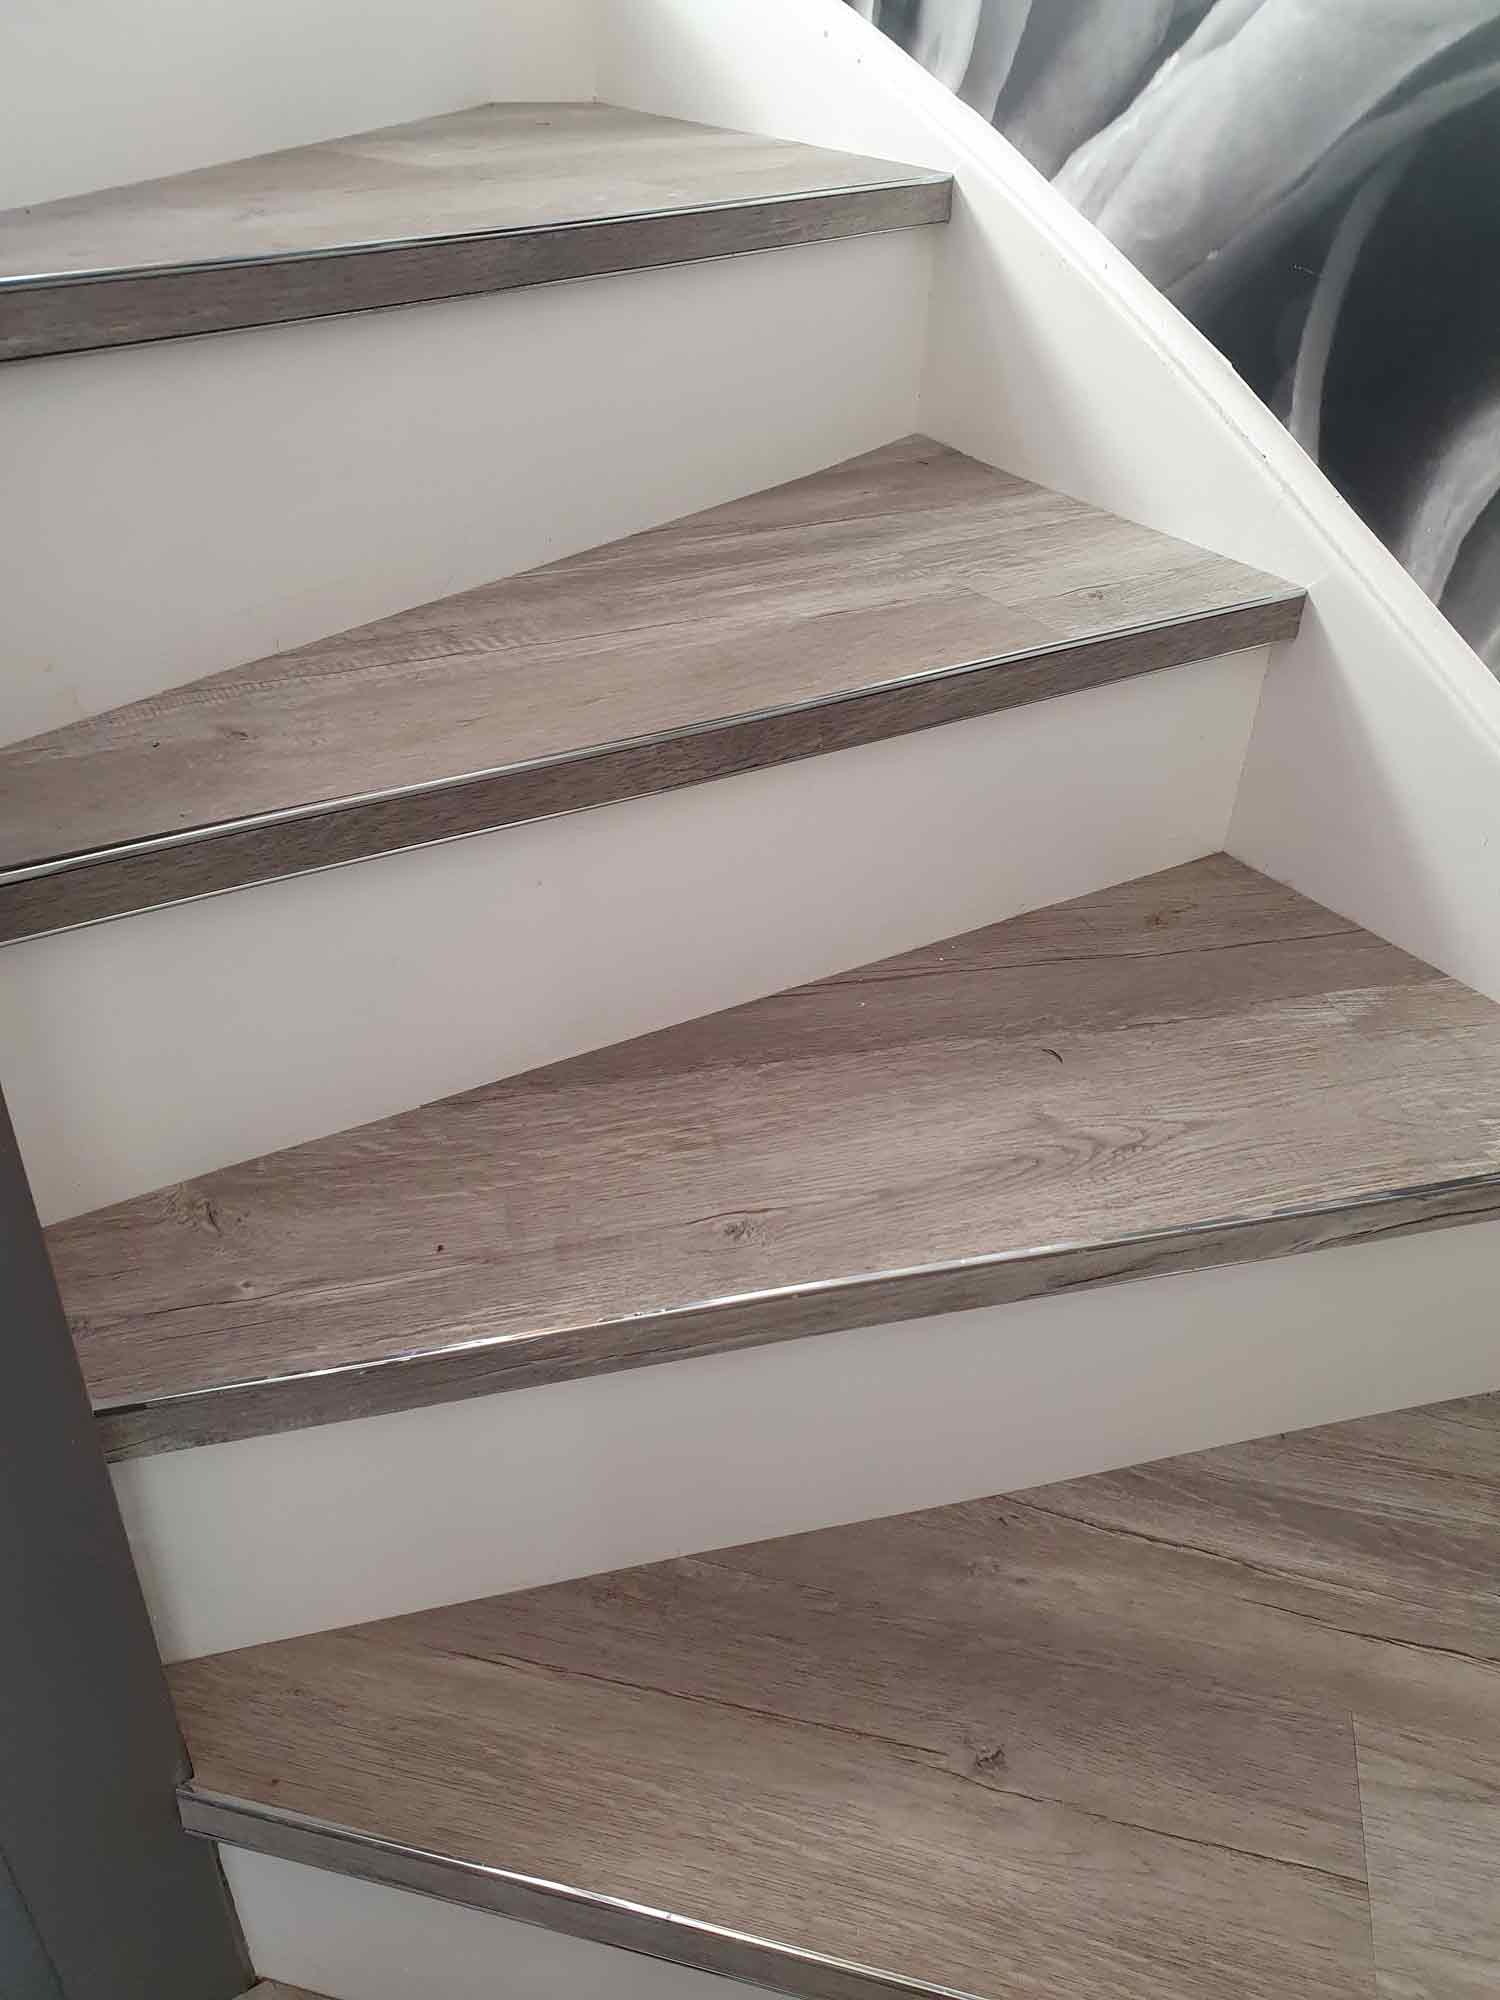 Premier bendy bull stair edge fitted to winding staircase fitted with wood-look LVT